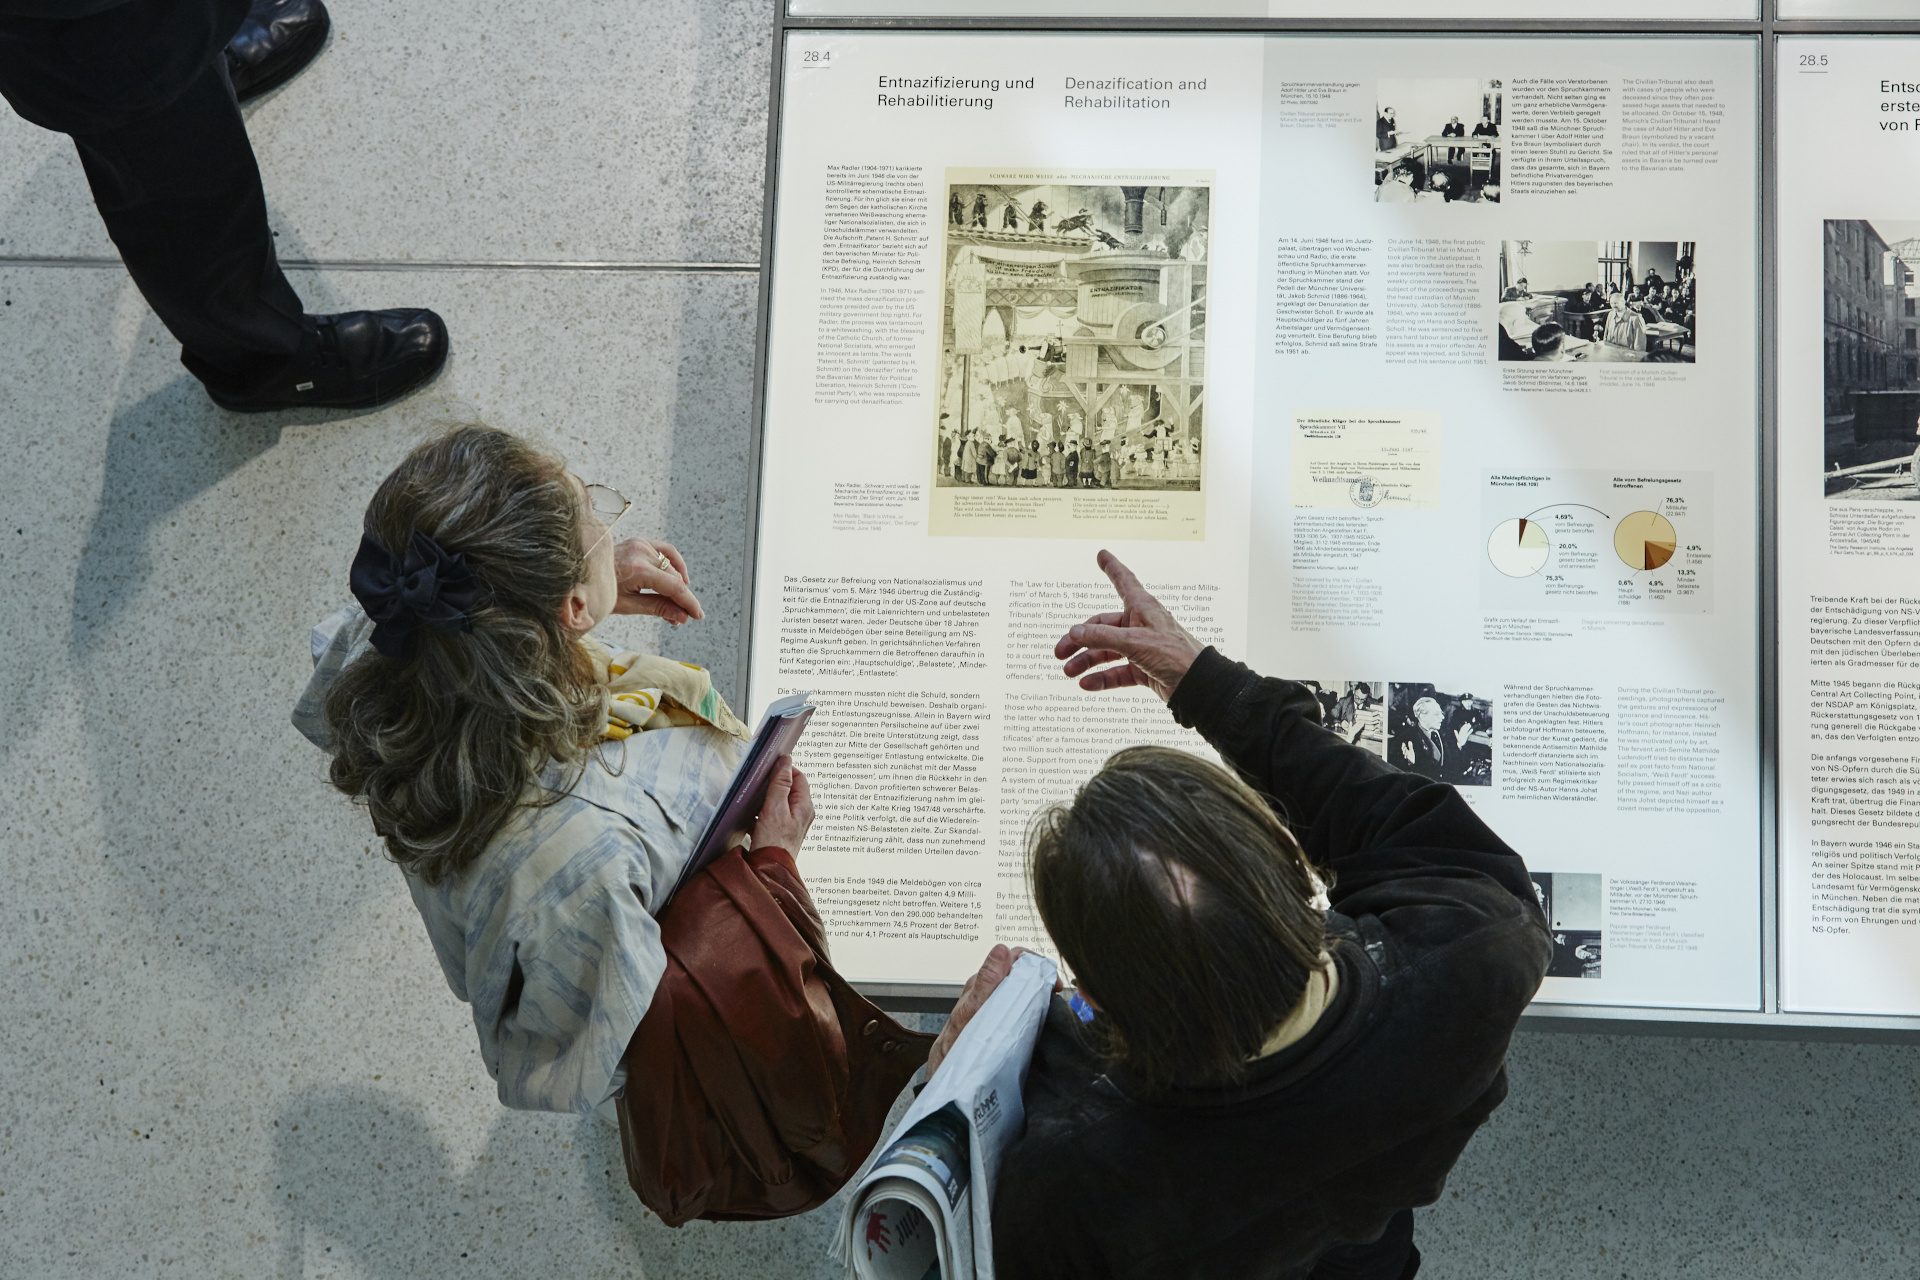 View from above of two people standing in front of an exhibition table with texts and images.